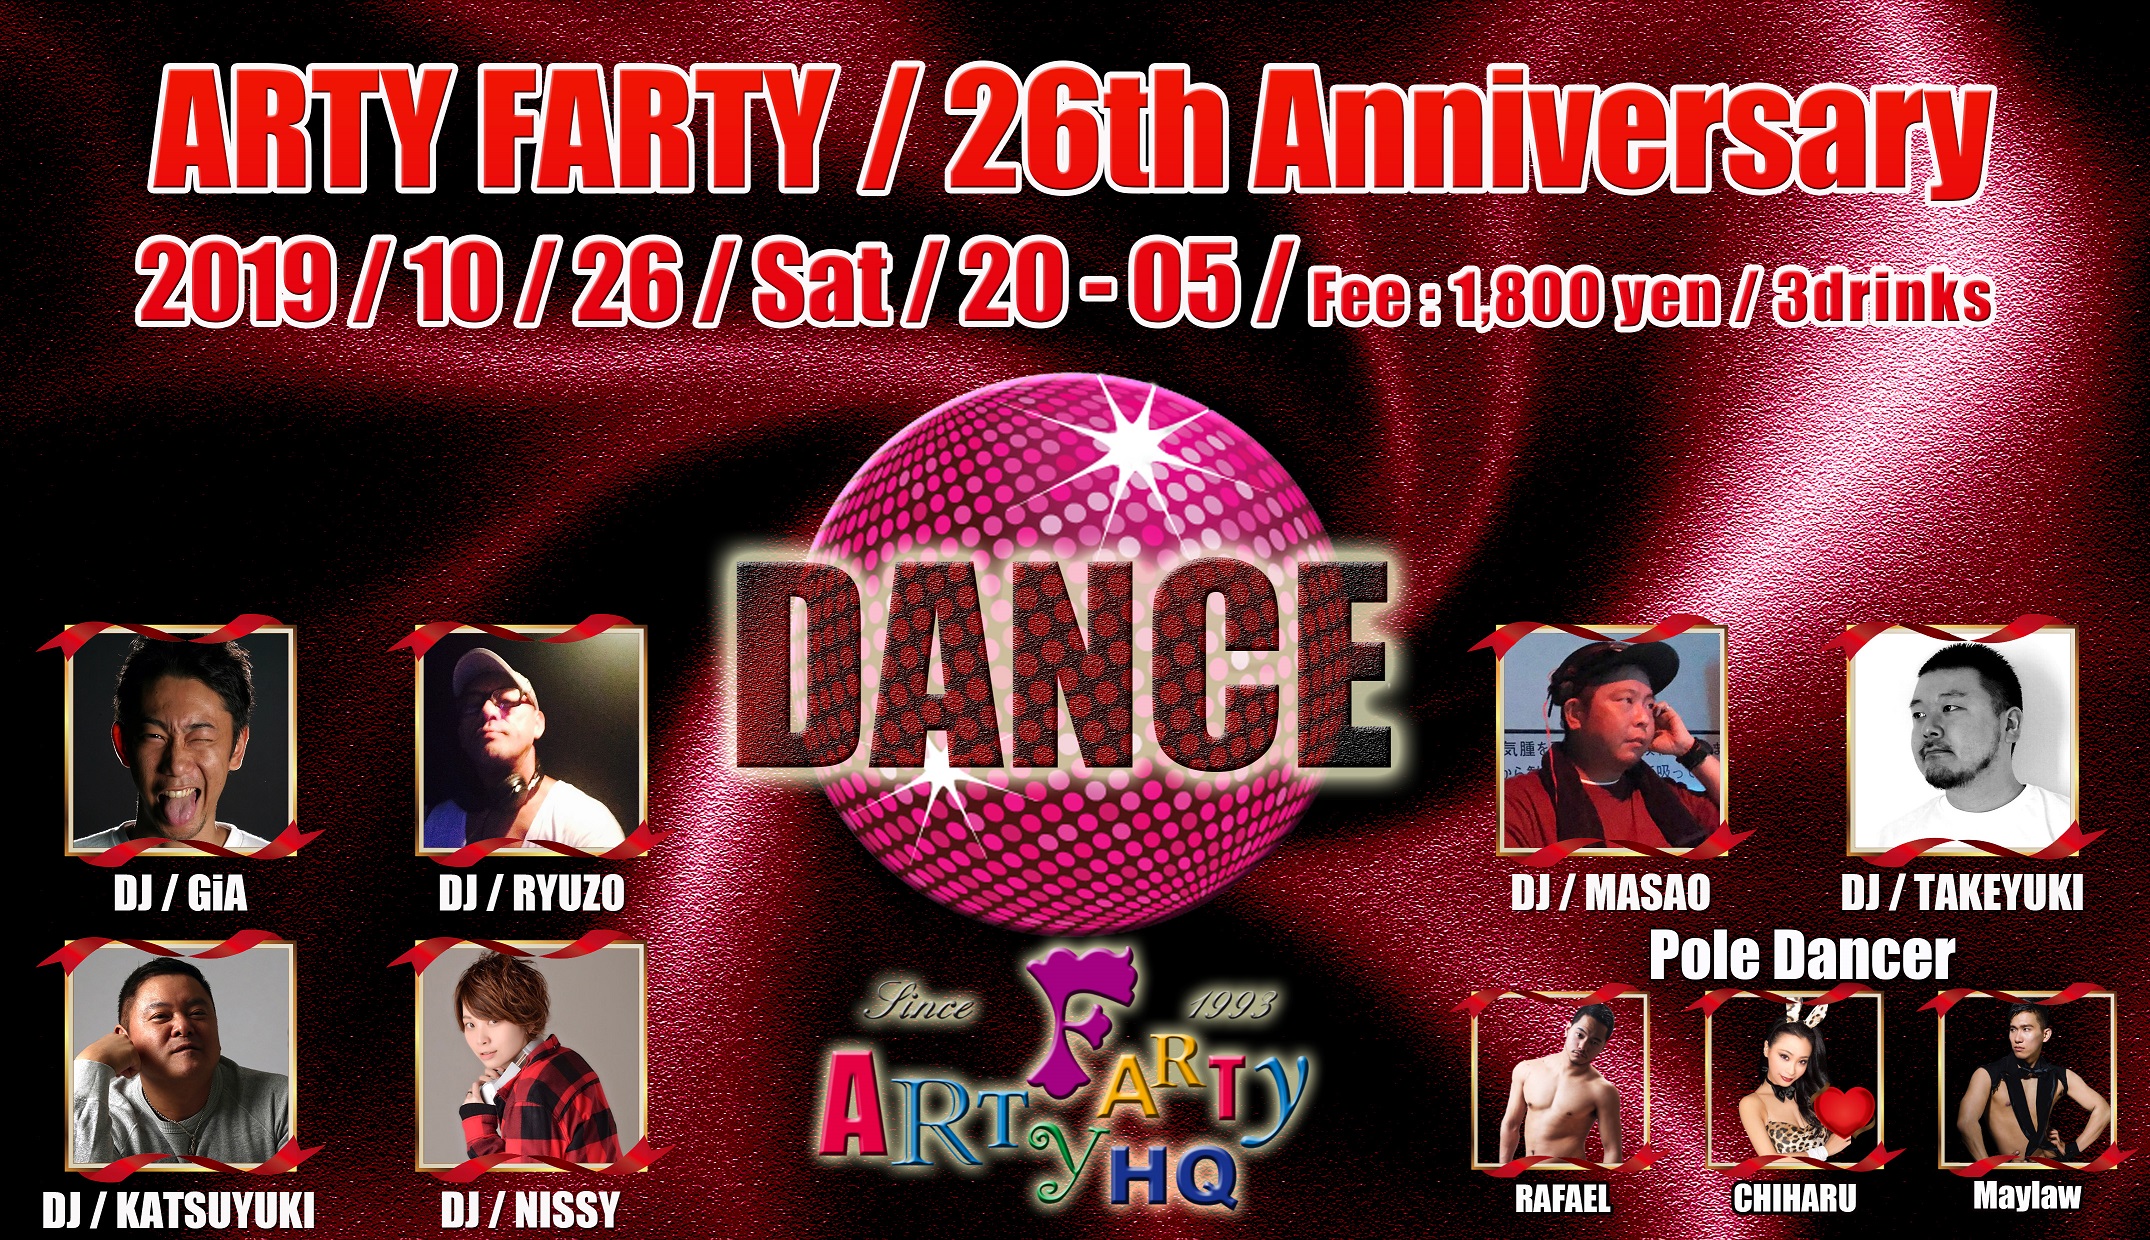 ARTY FARTY 26th Anniversary